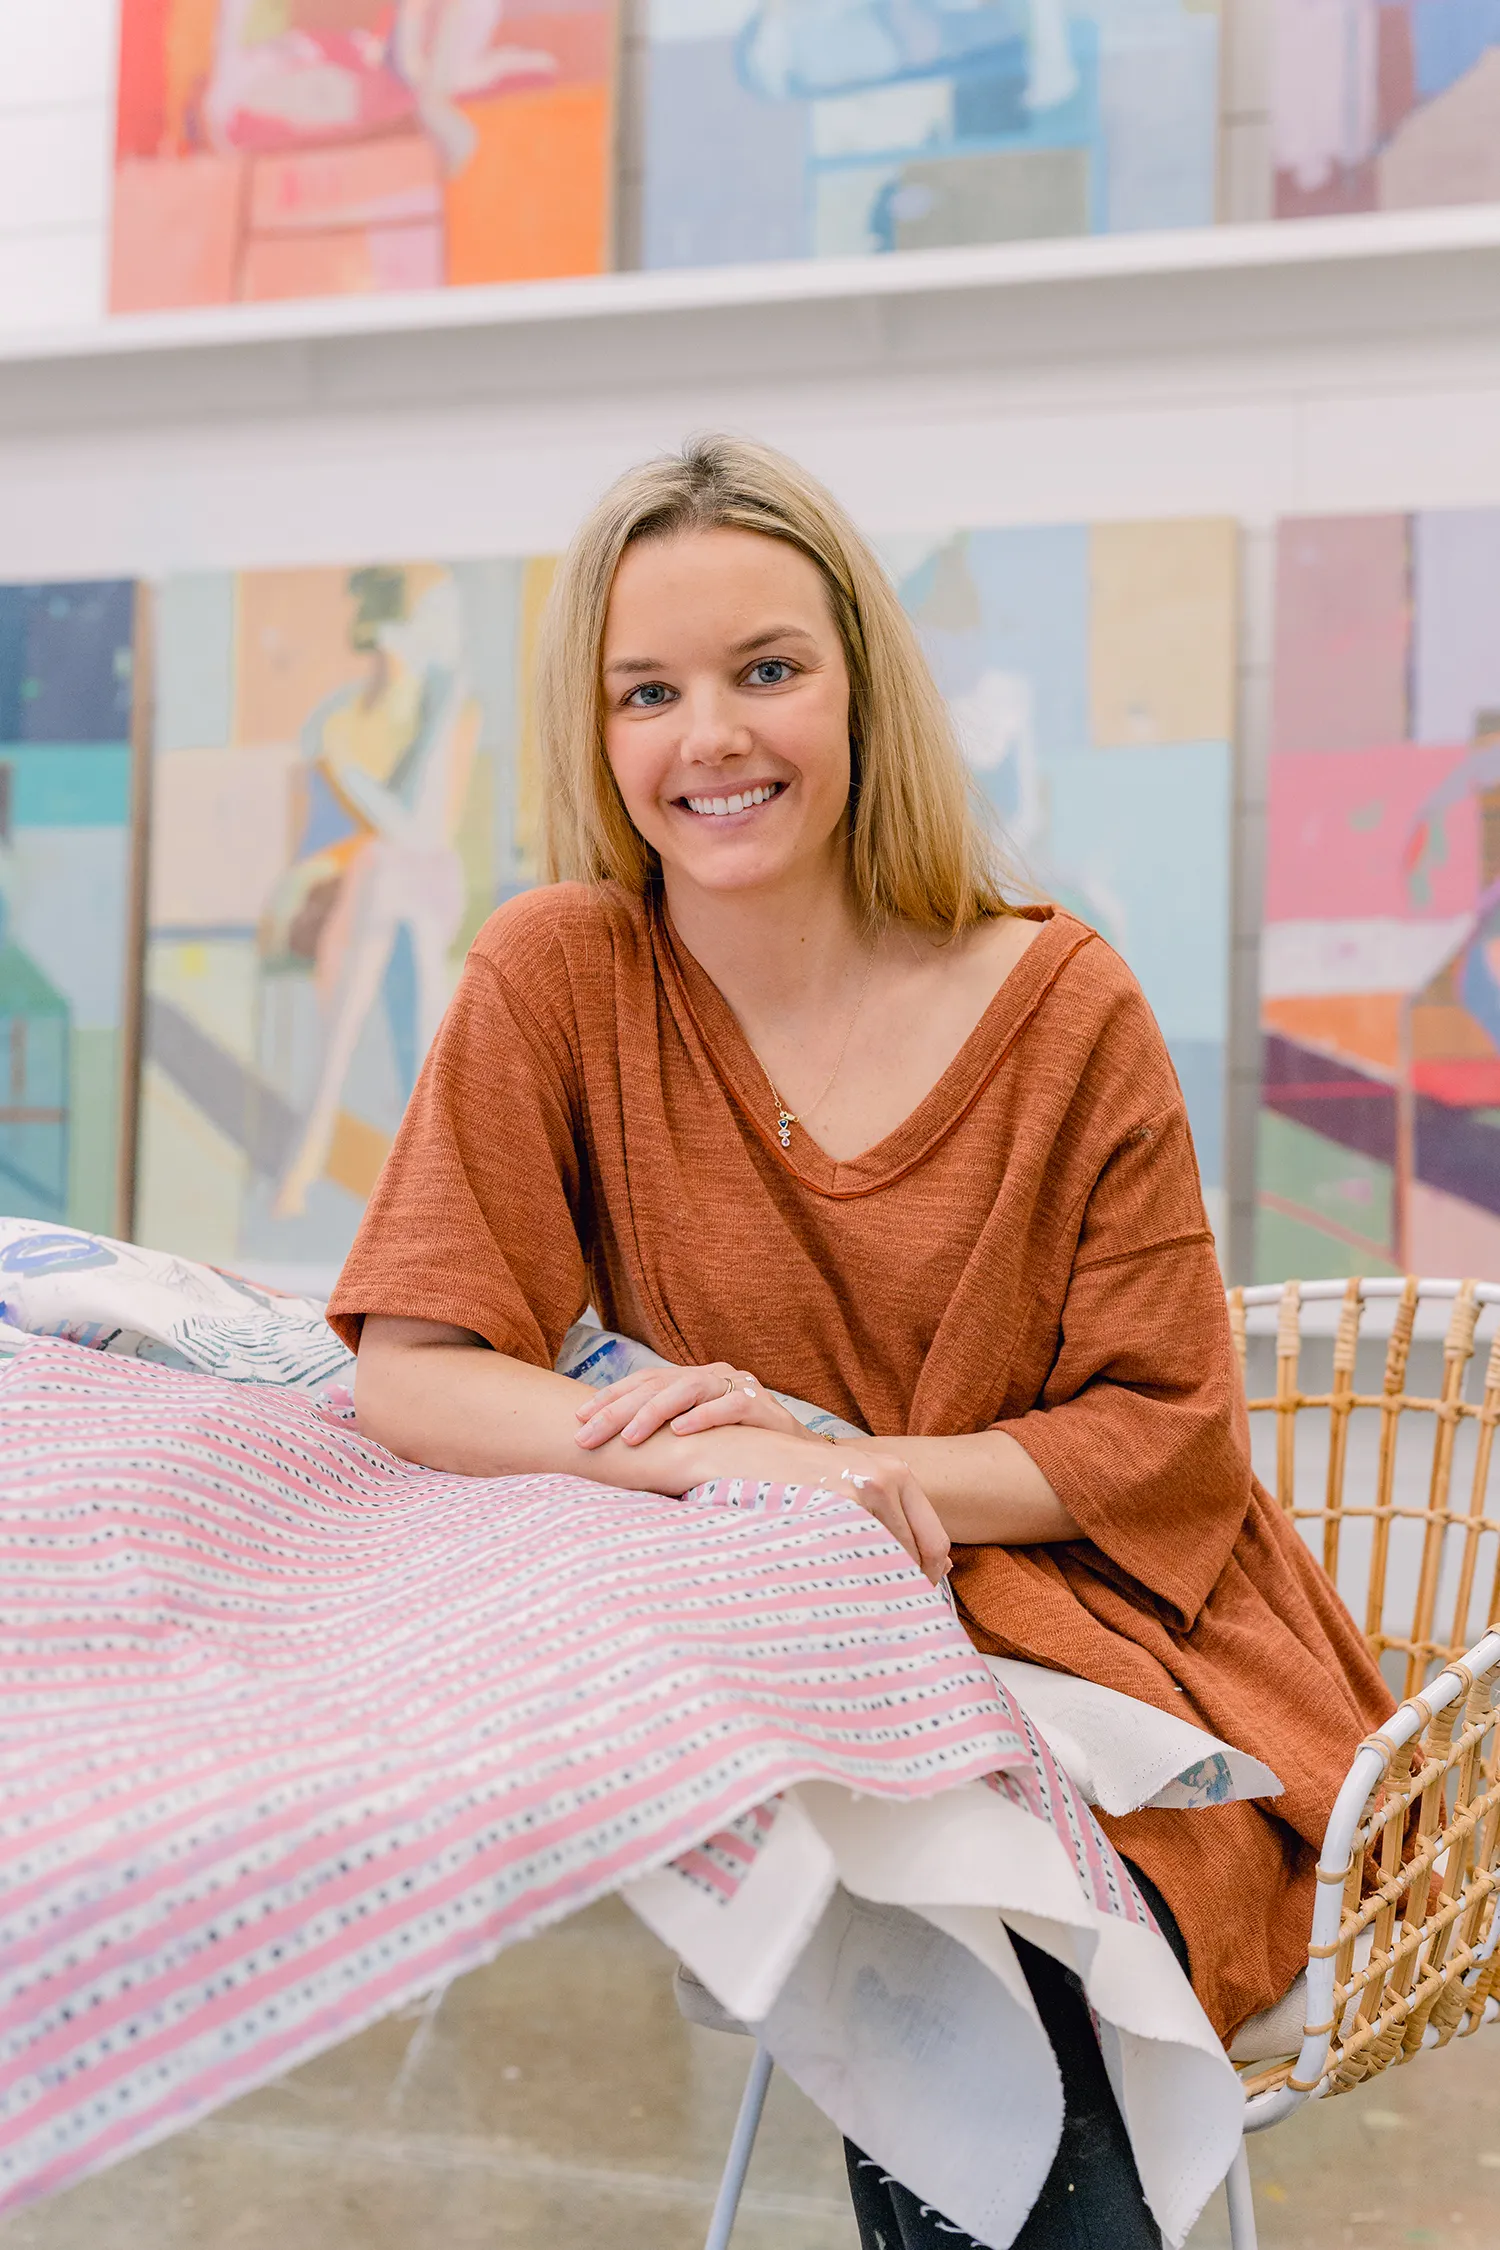 Teil Henly smiling in front of paintings with textiles